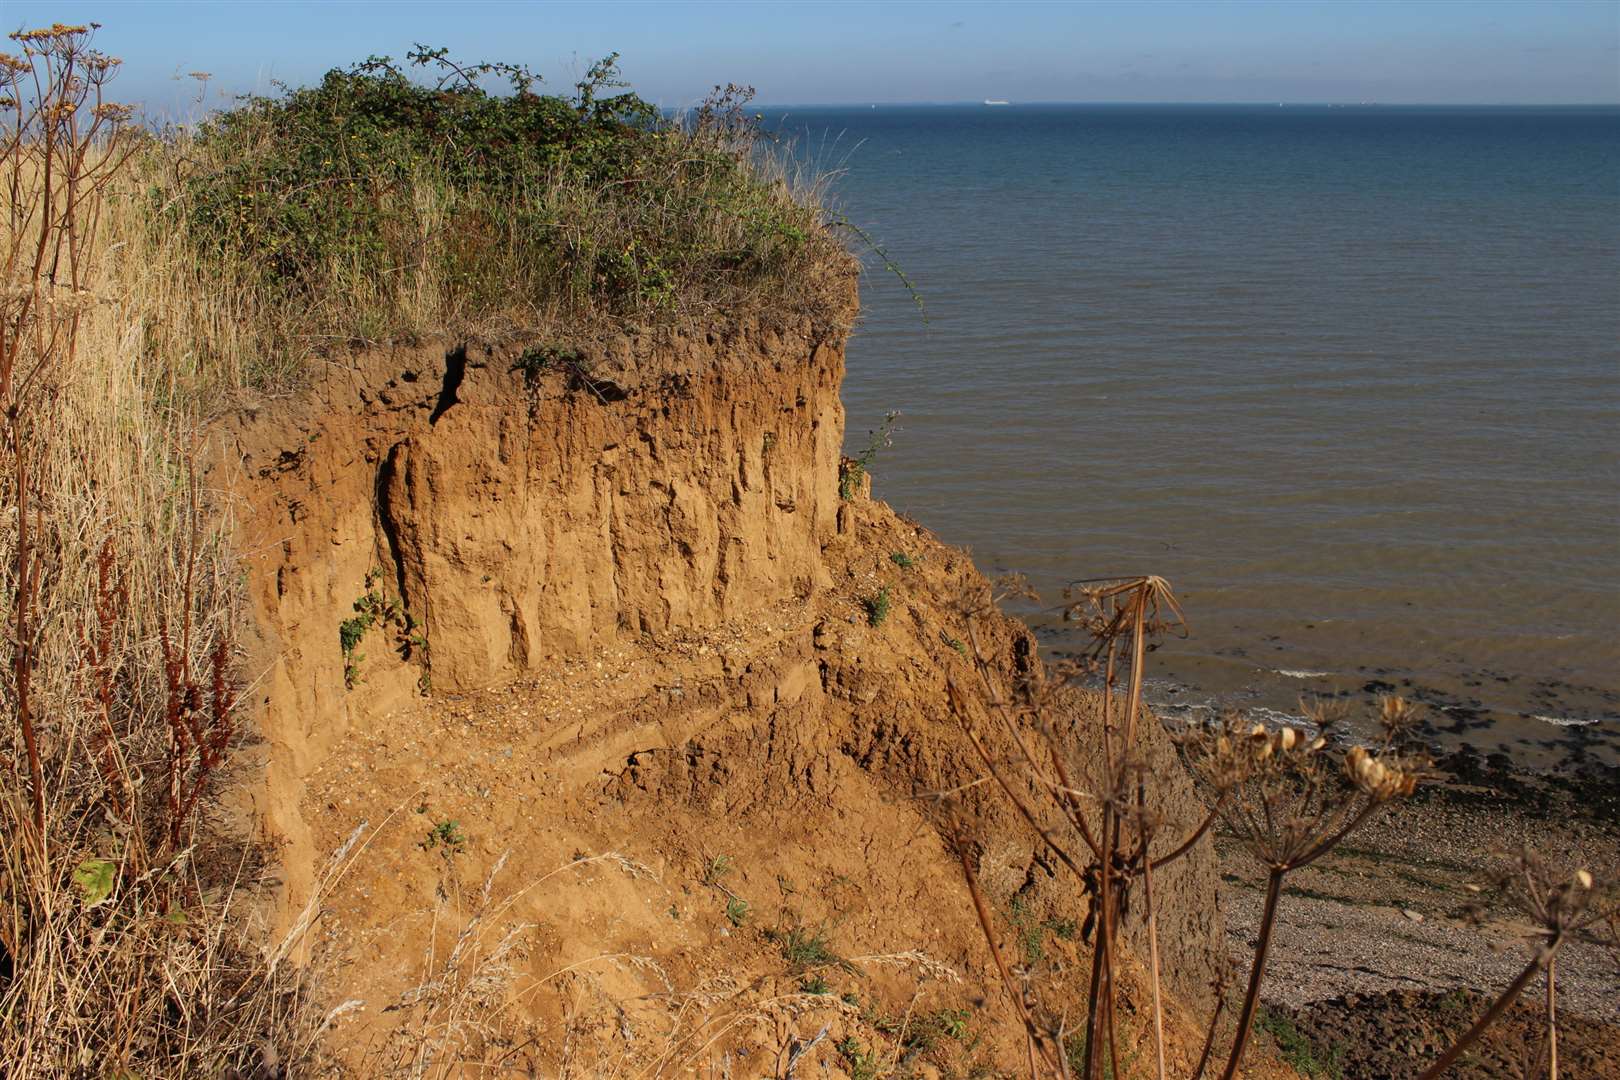 The crumbling cliffs at Eastchurch